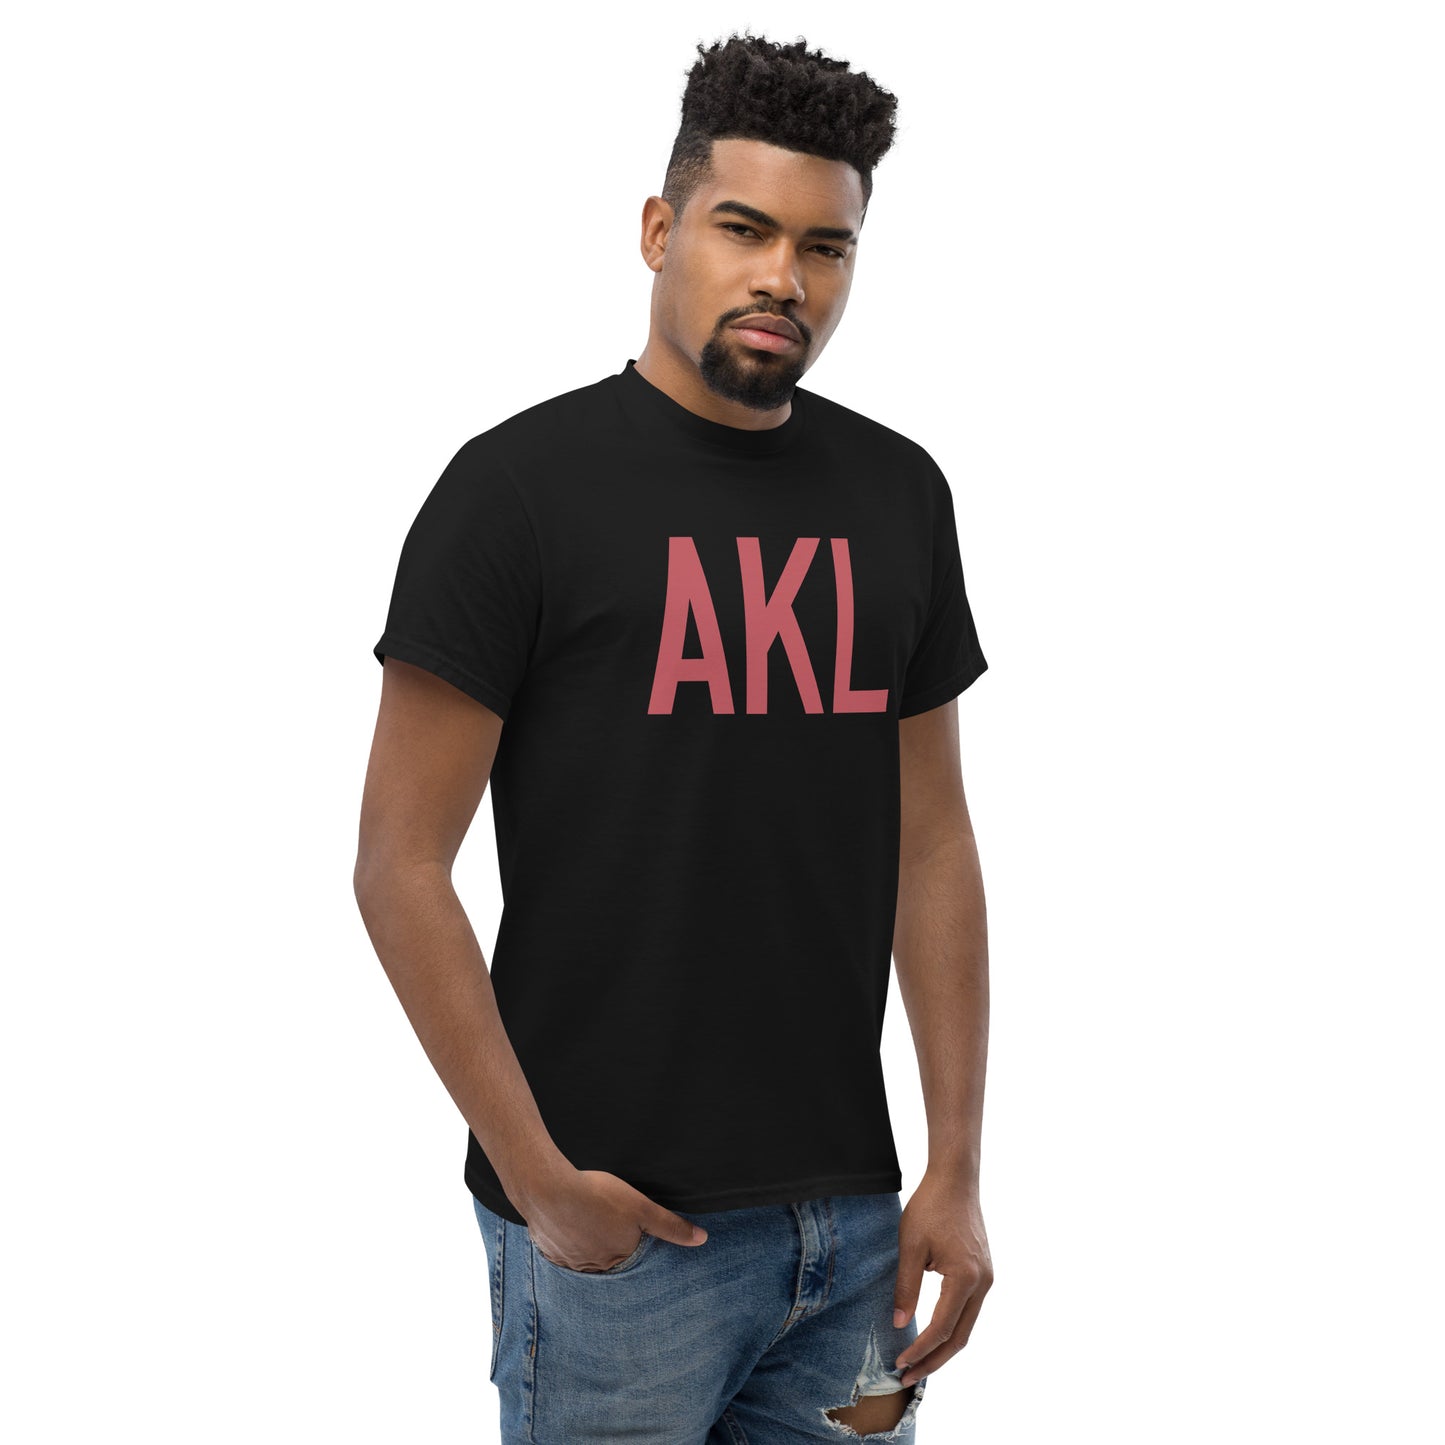 Aviation Enthusiast Men's Tee - Deep Pink Graphic • AKL Auckland • YHM Designs - Image 08